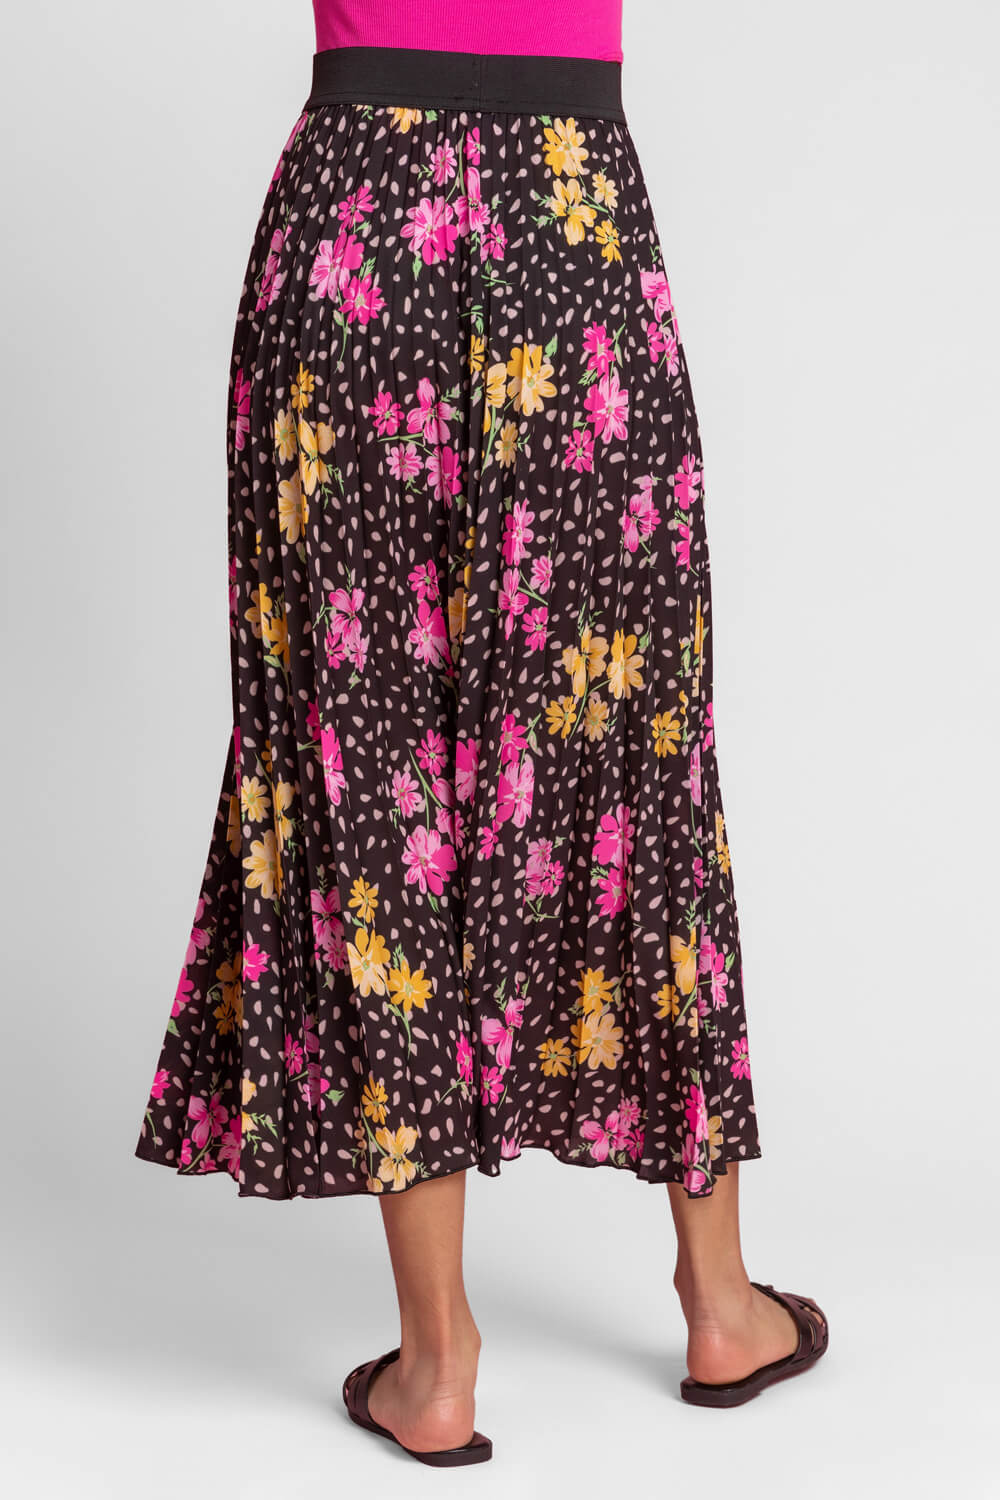 Black Floral Spot Print Pleated Maxi Skirt, Image 3 of 4